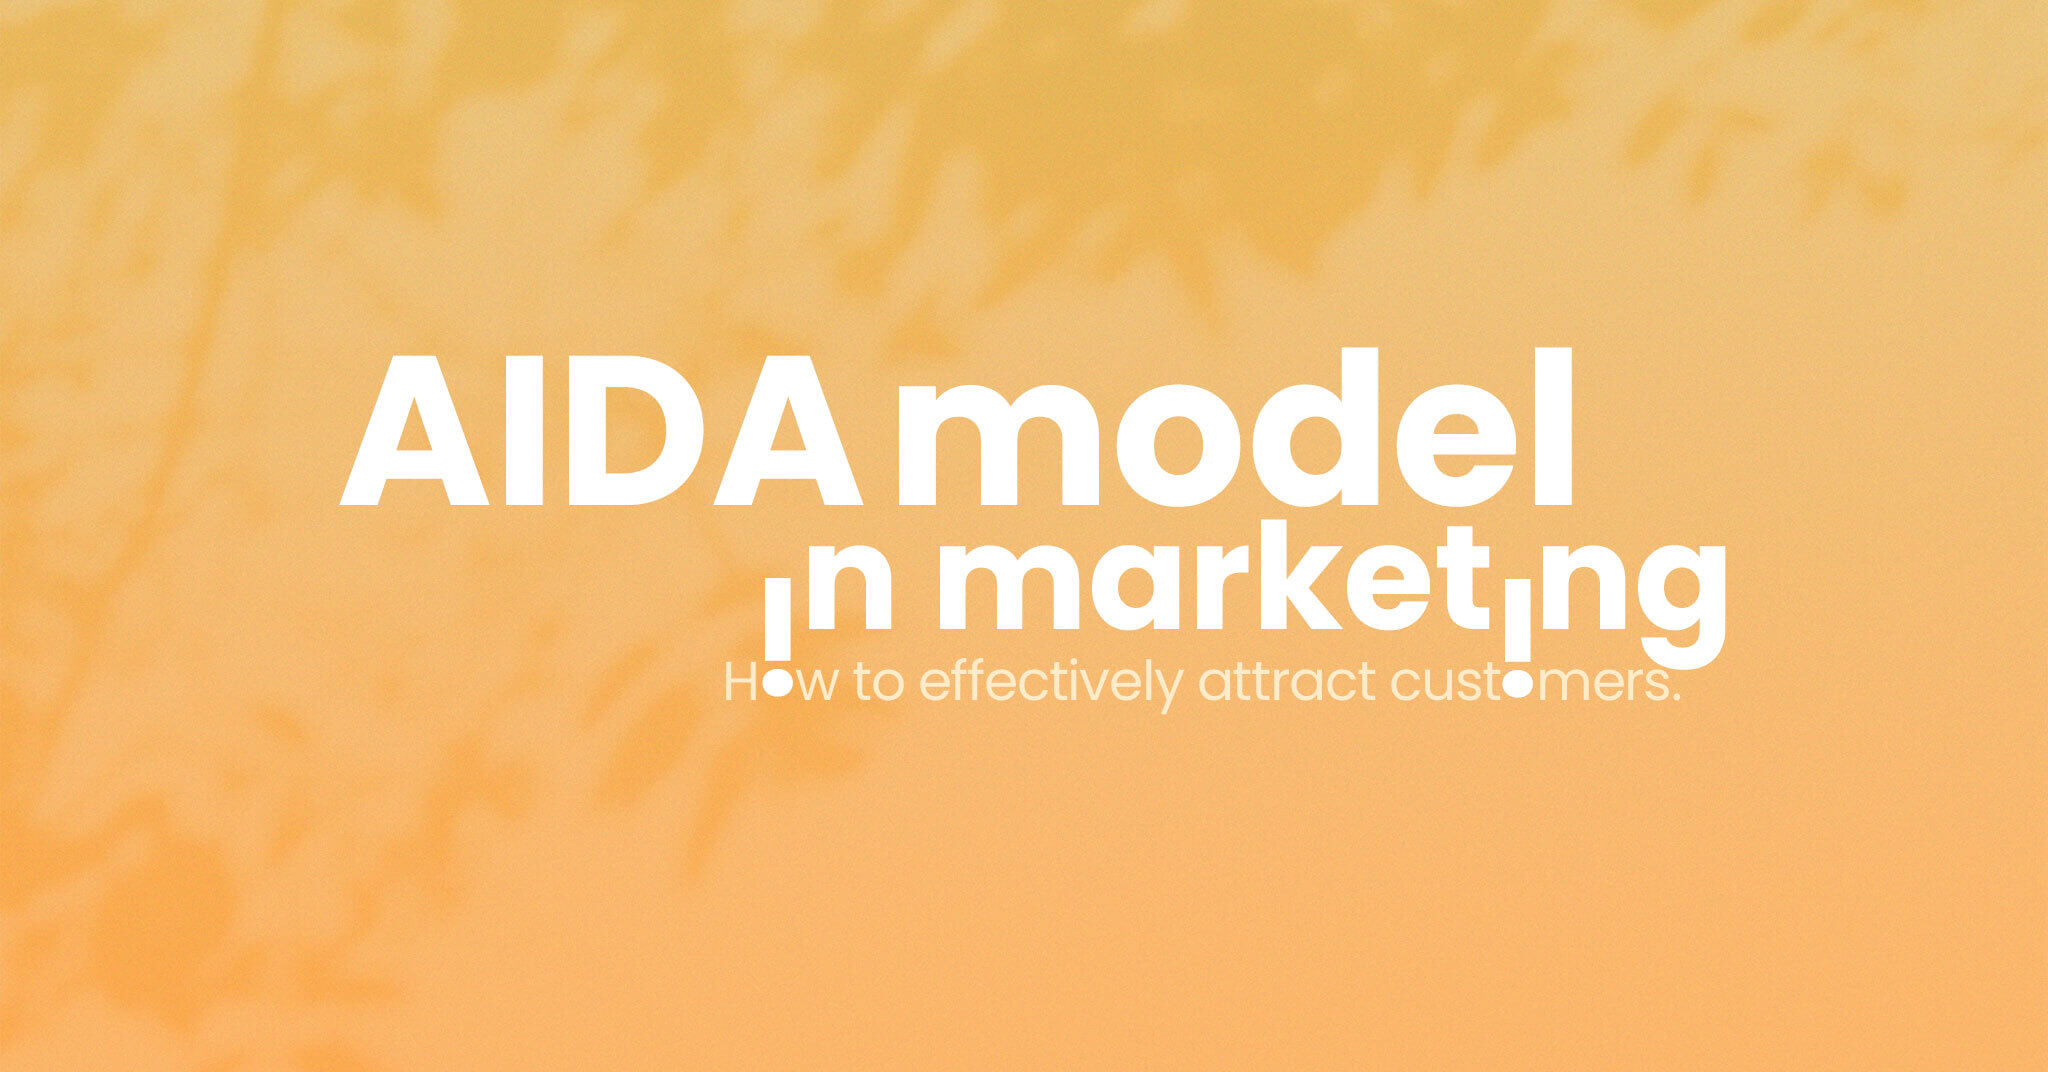 What is the AIDA model in marketing?